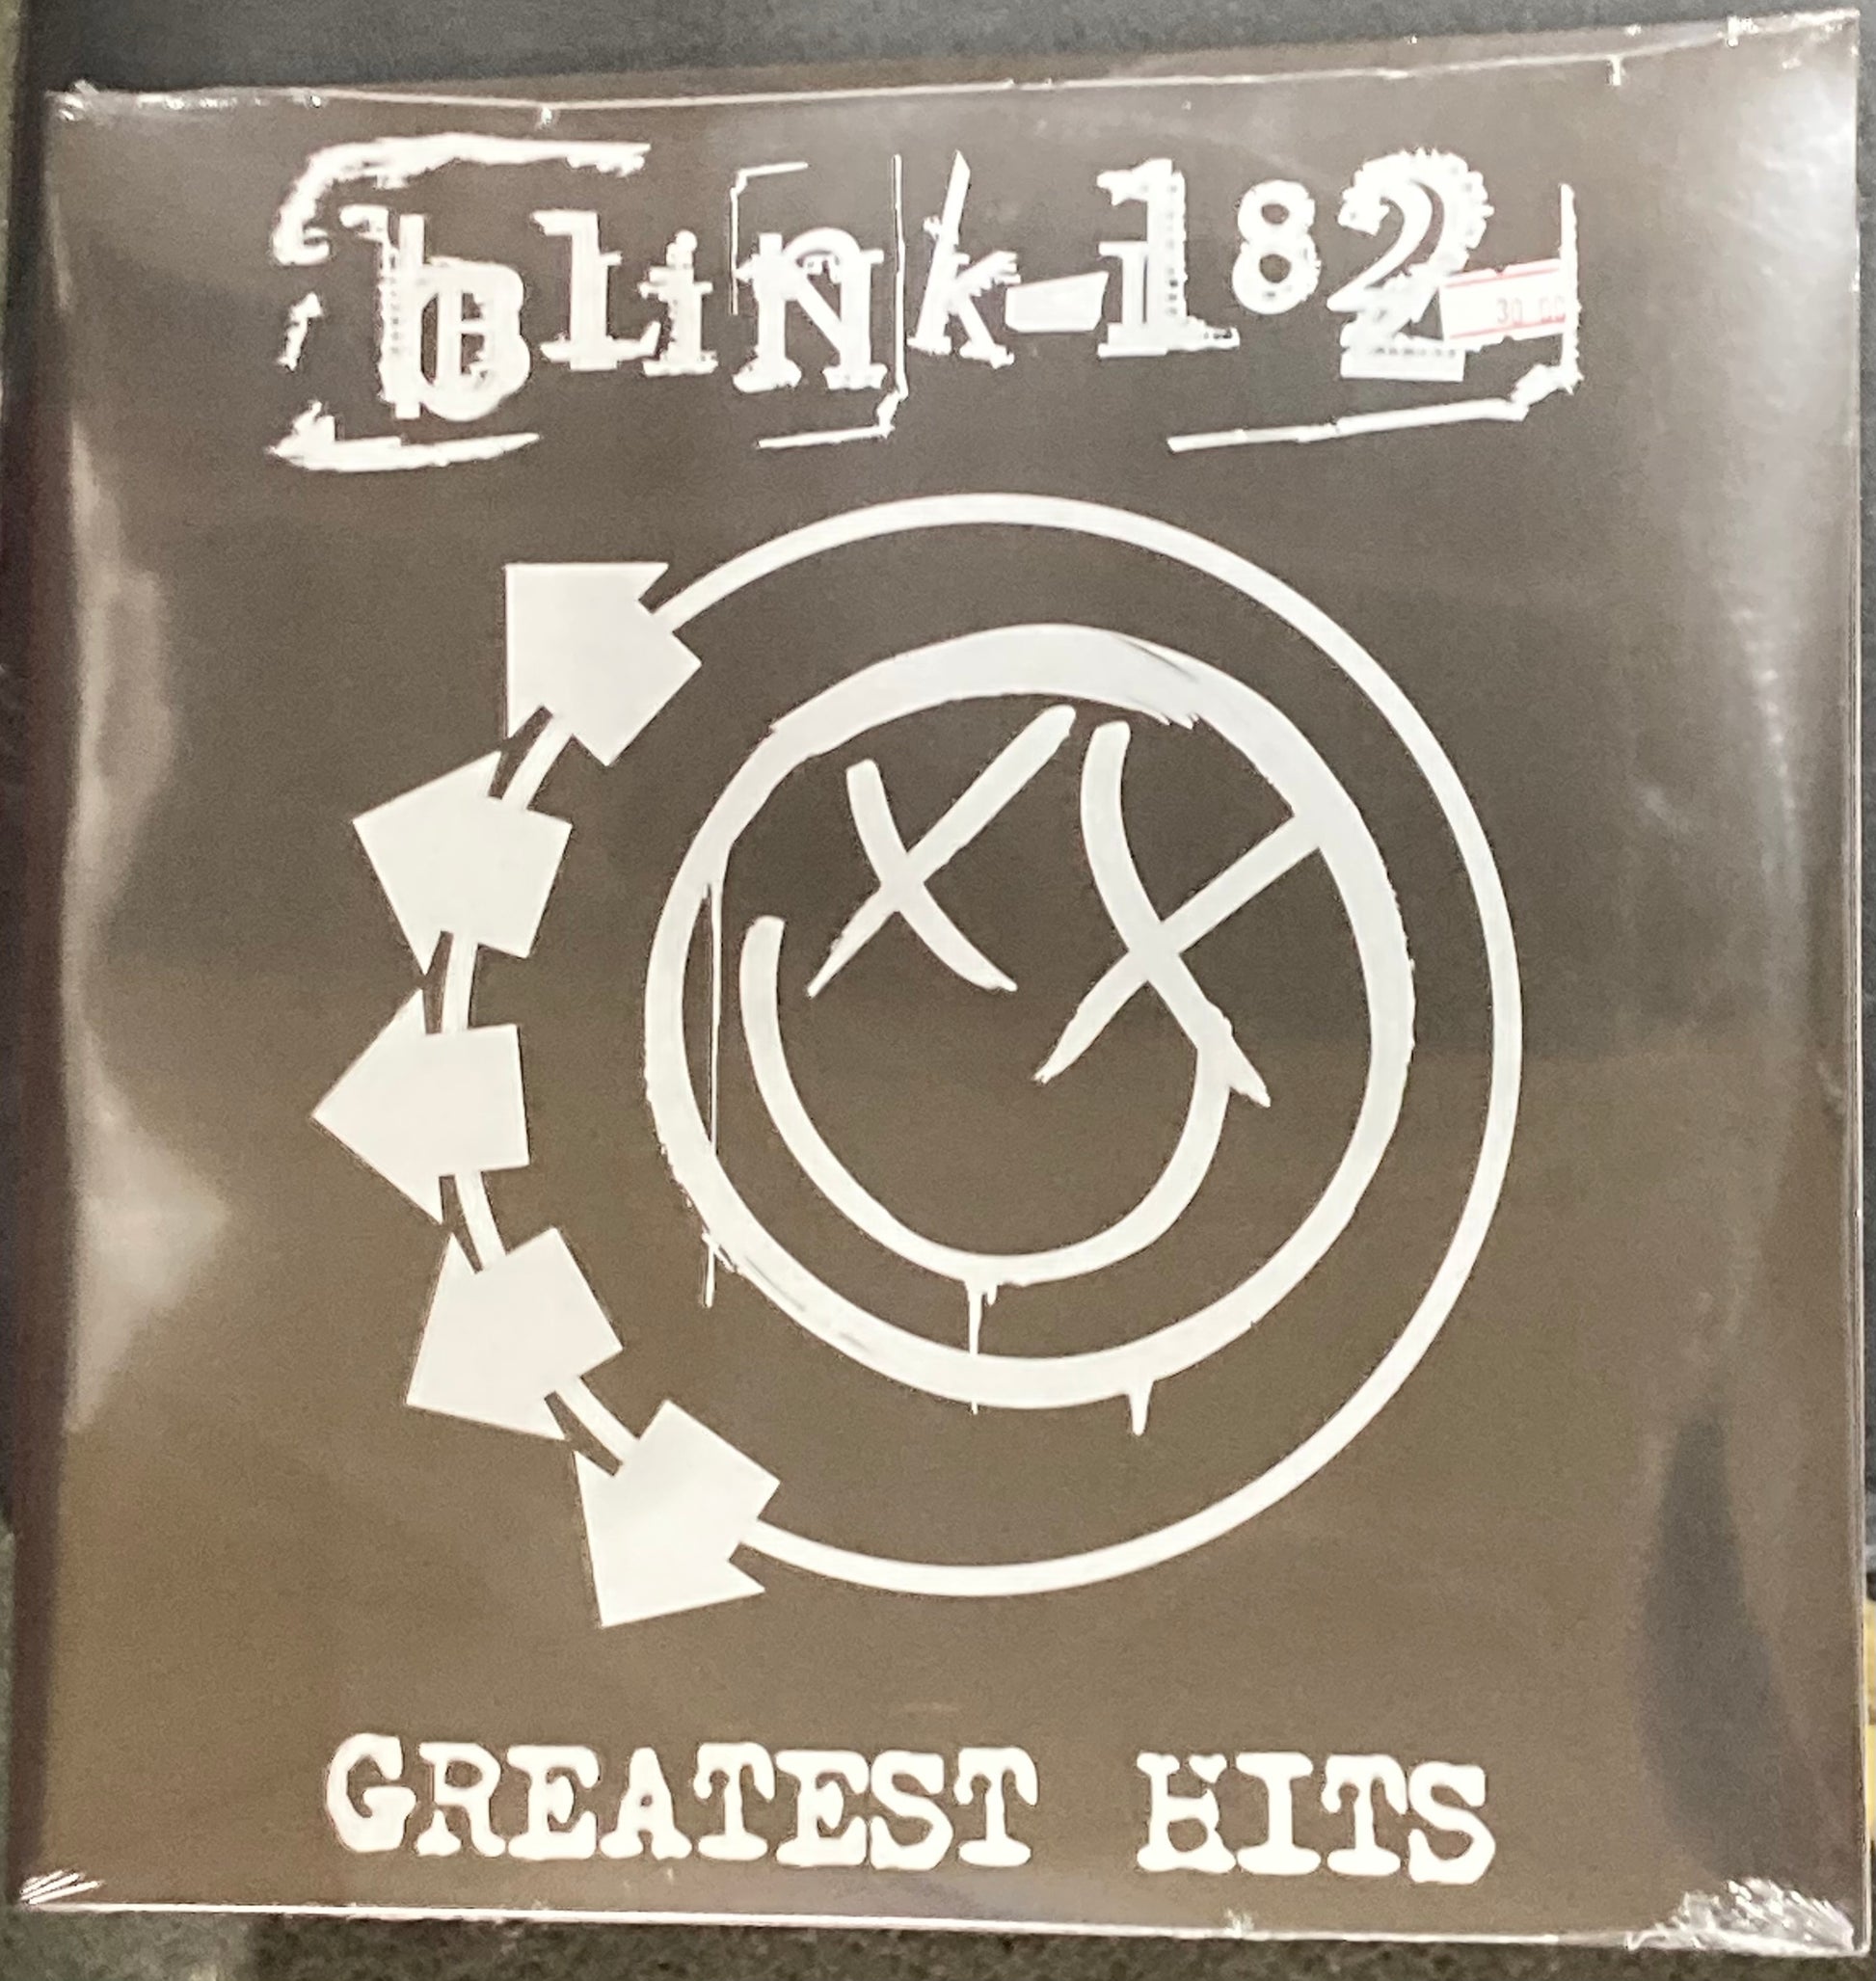 The front of 'Blink 182 - Greatest Hits' on vinyl